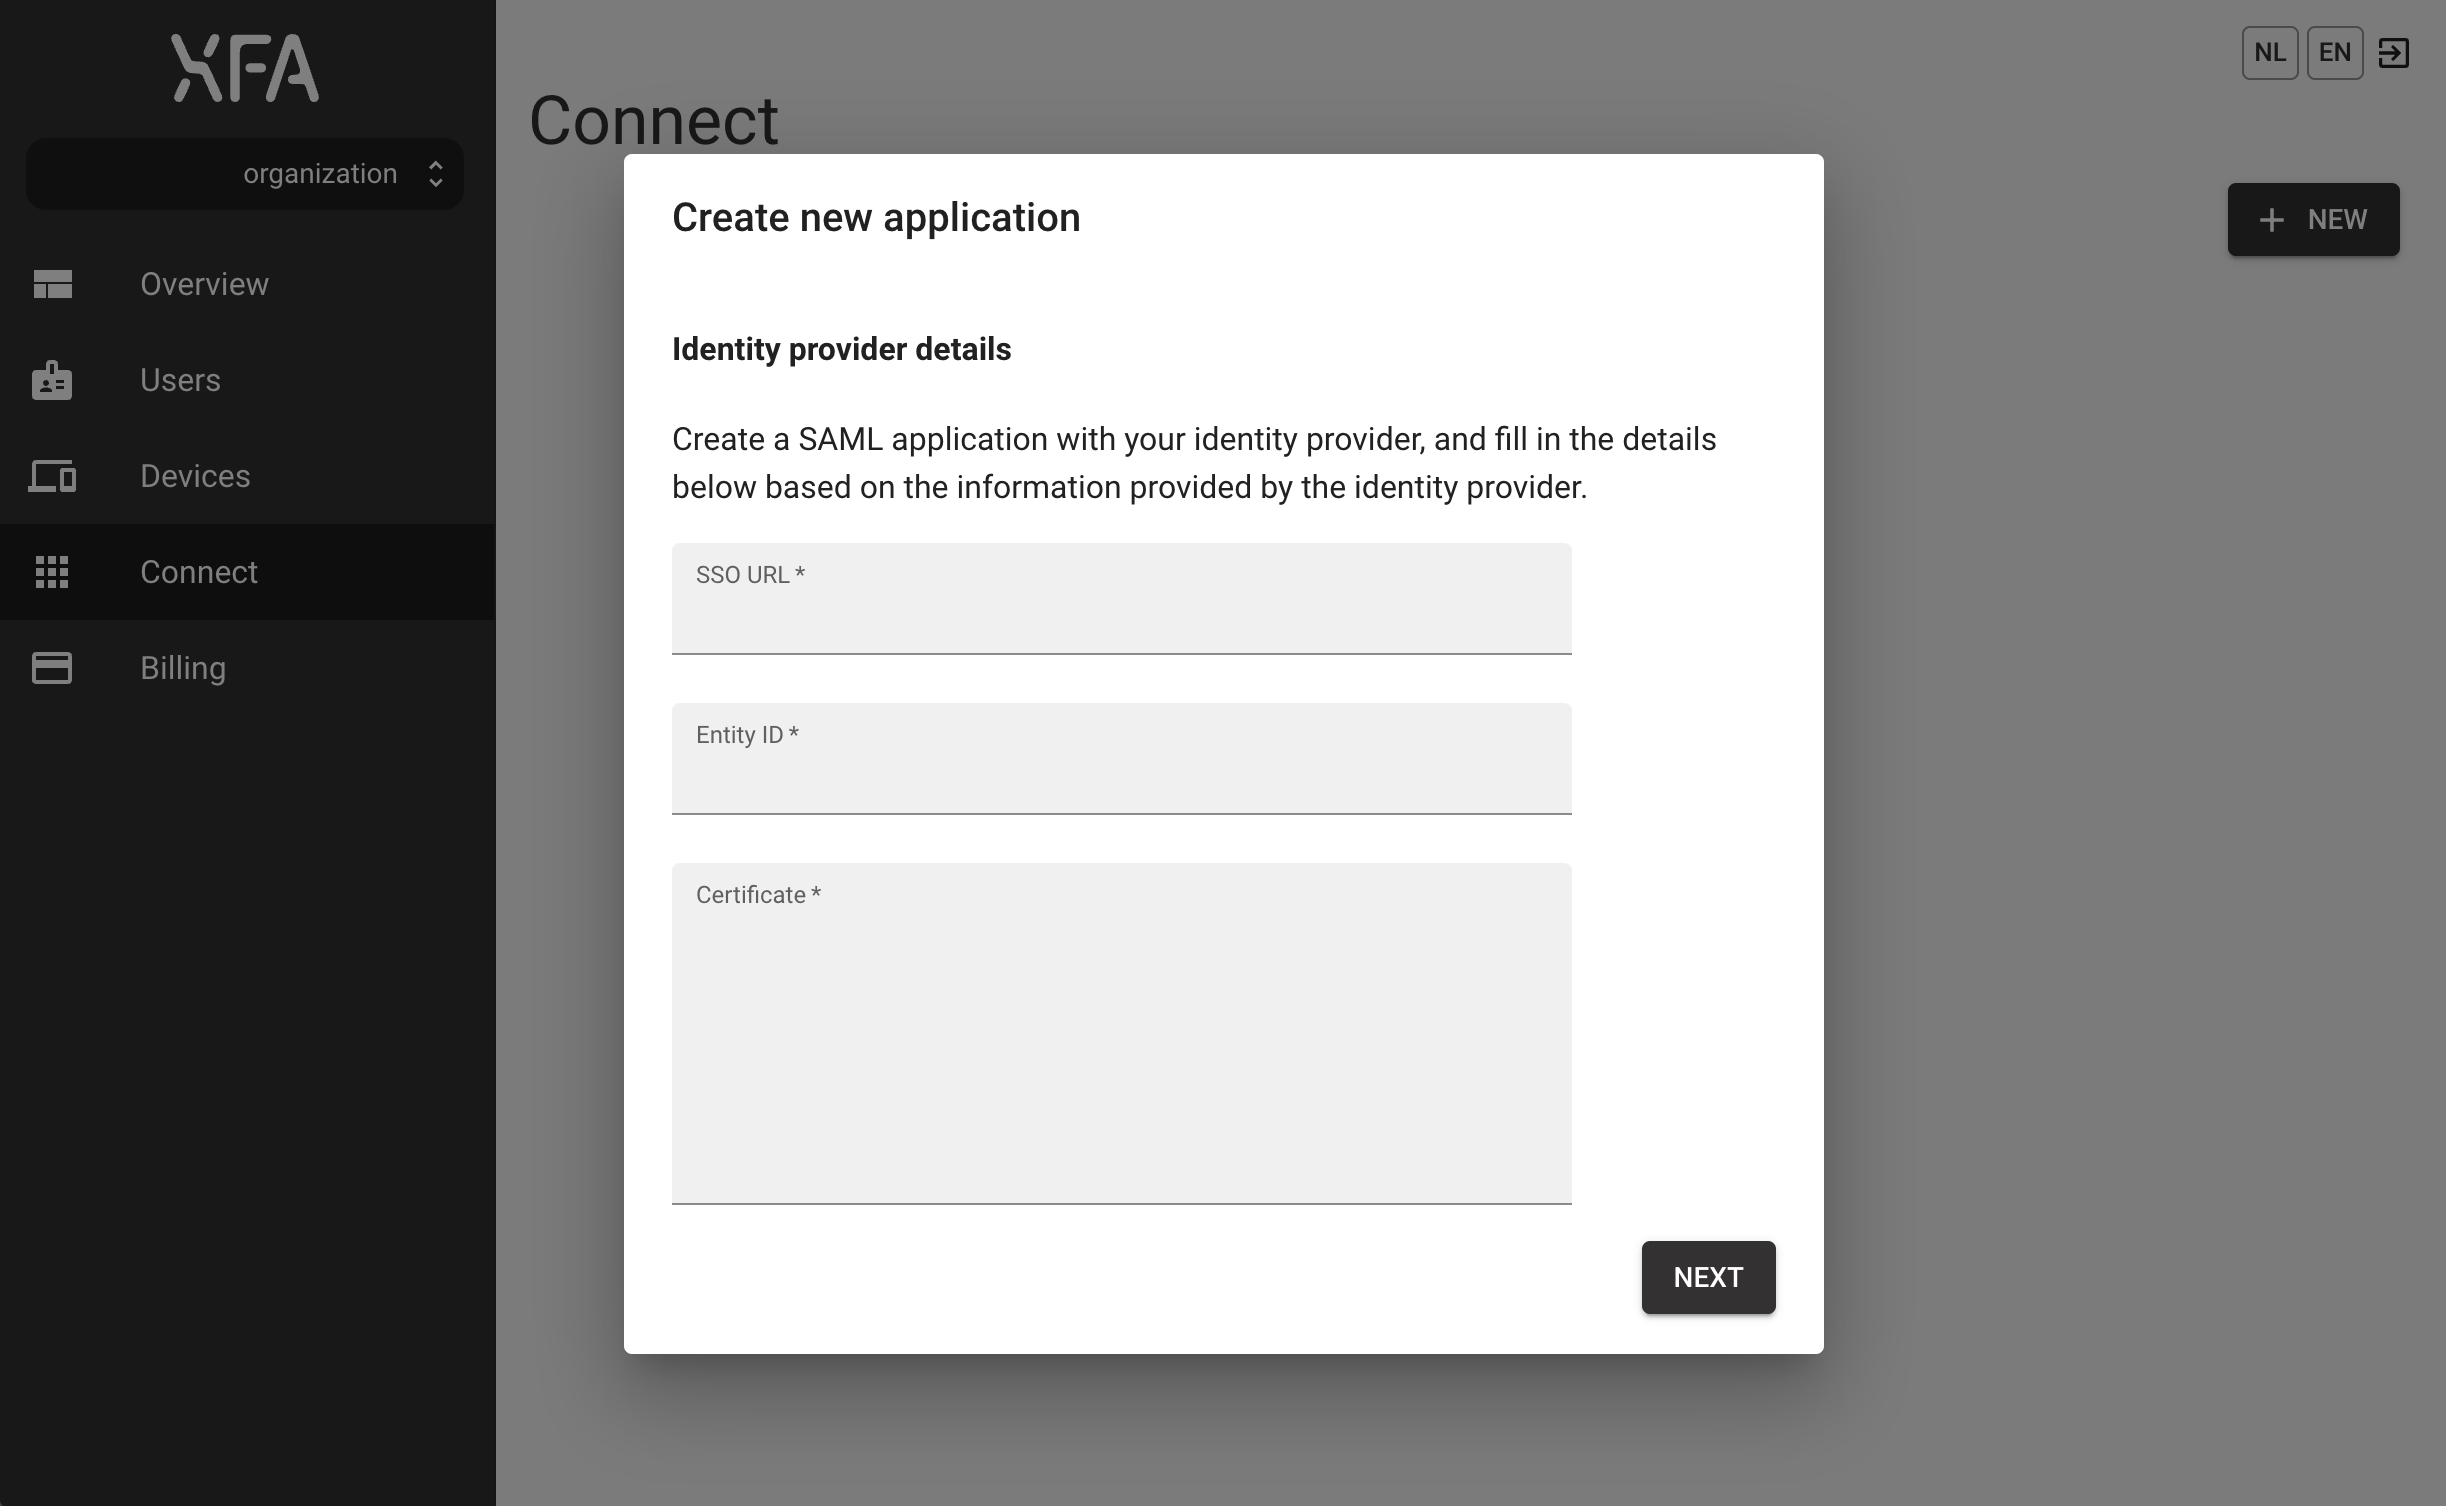 Fill in the identity provider details